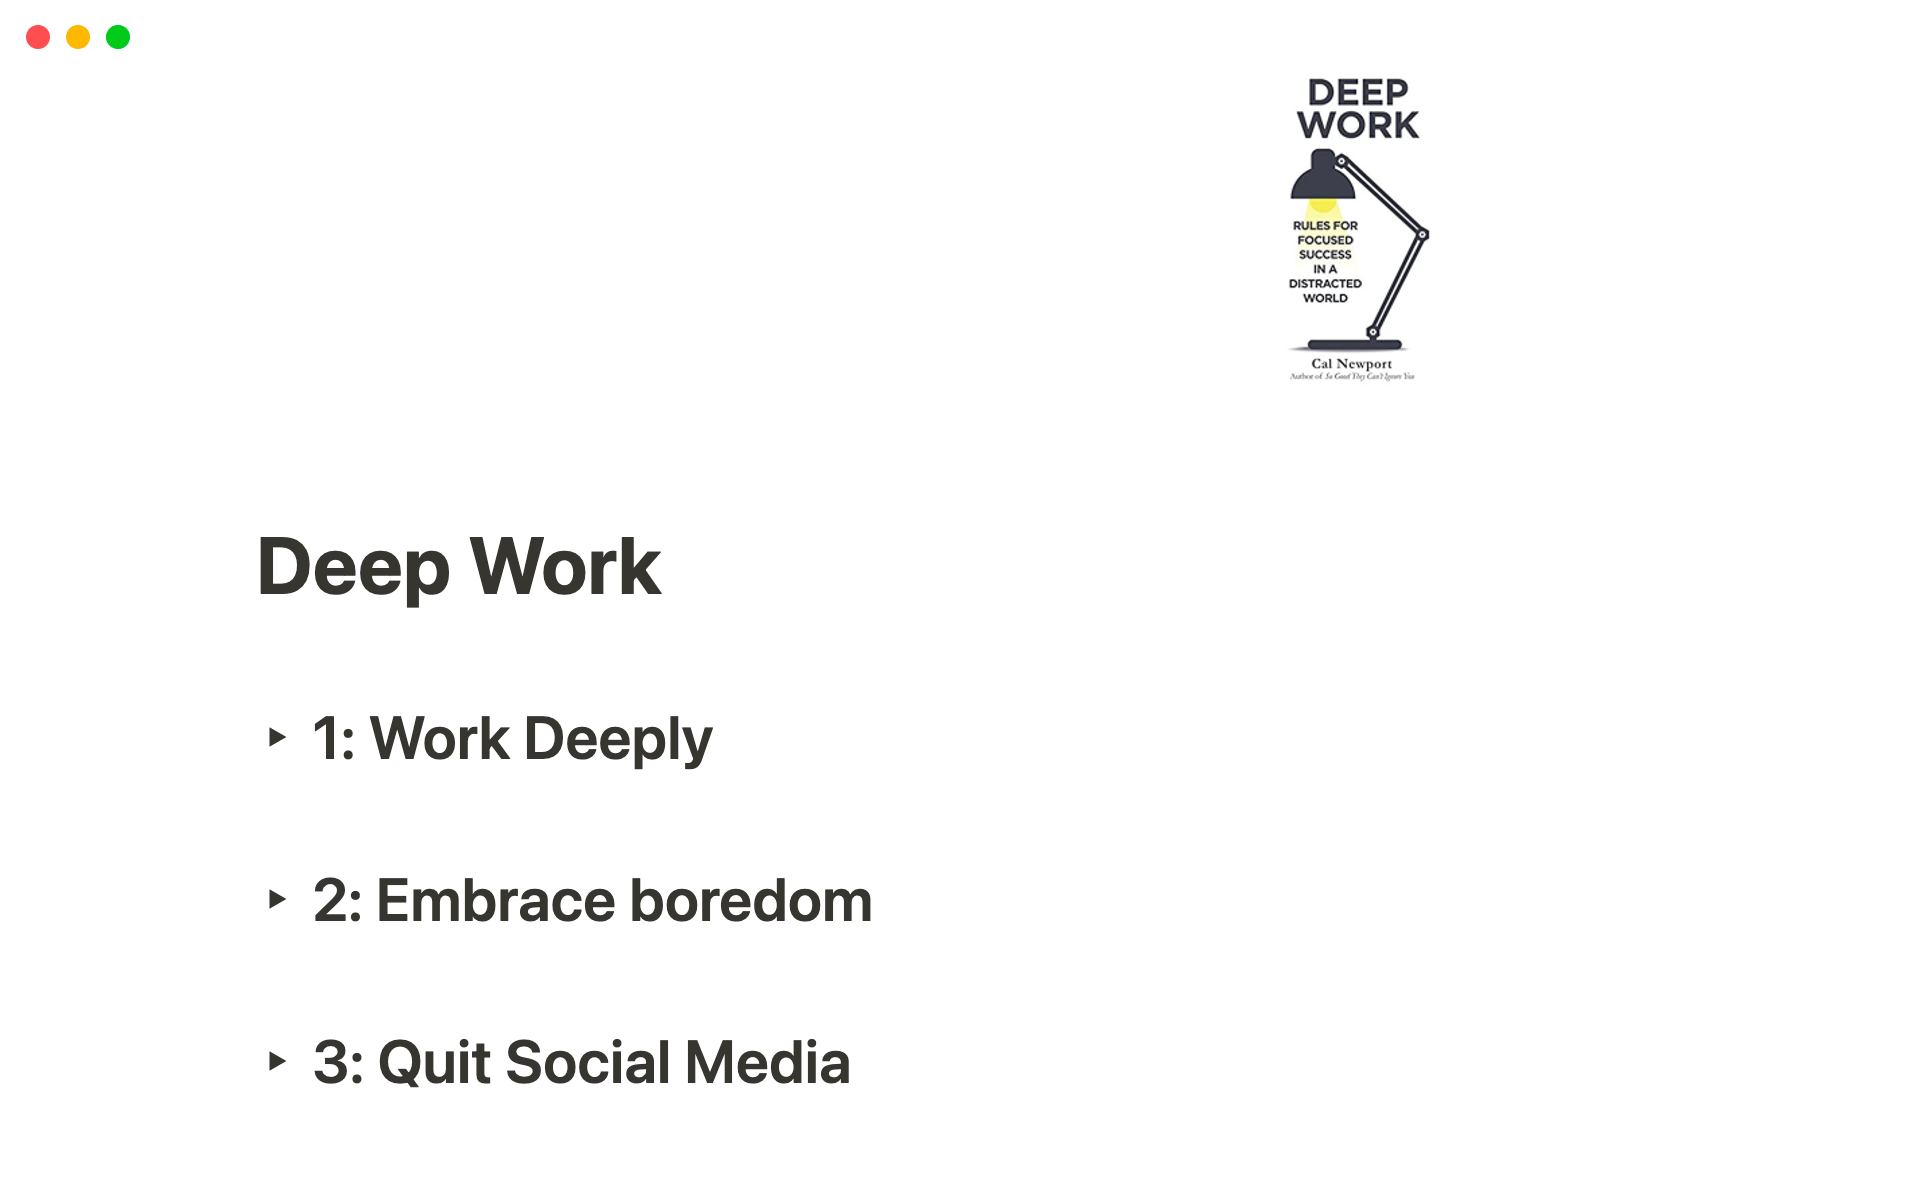 A concise summary of "Deep Work" by Cal Newport, organized by chapter and sub-chapter for easy navigation.